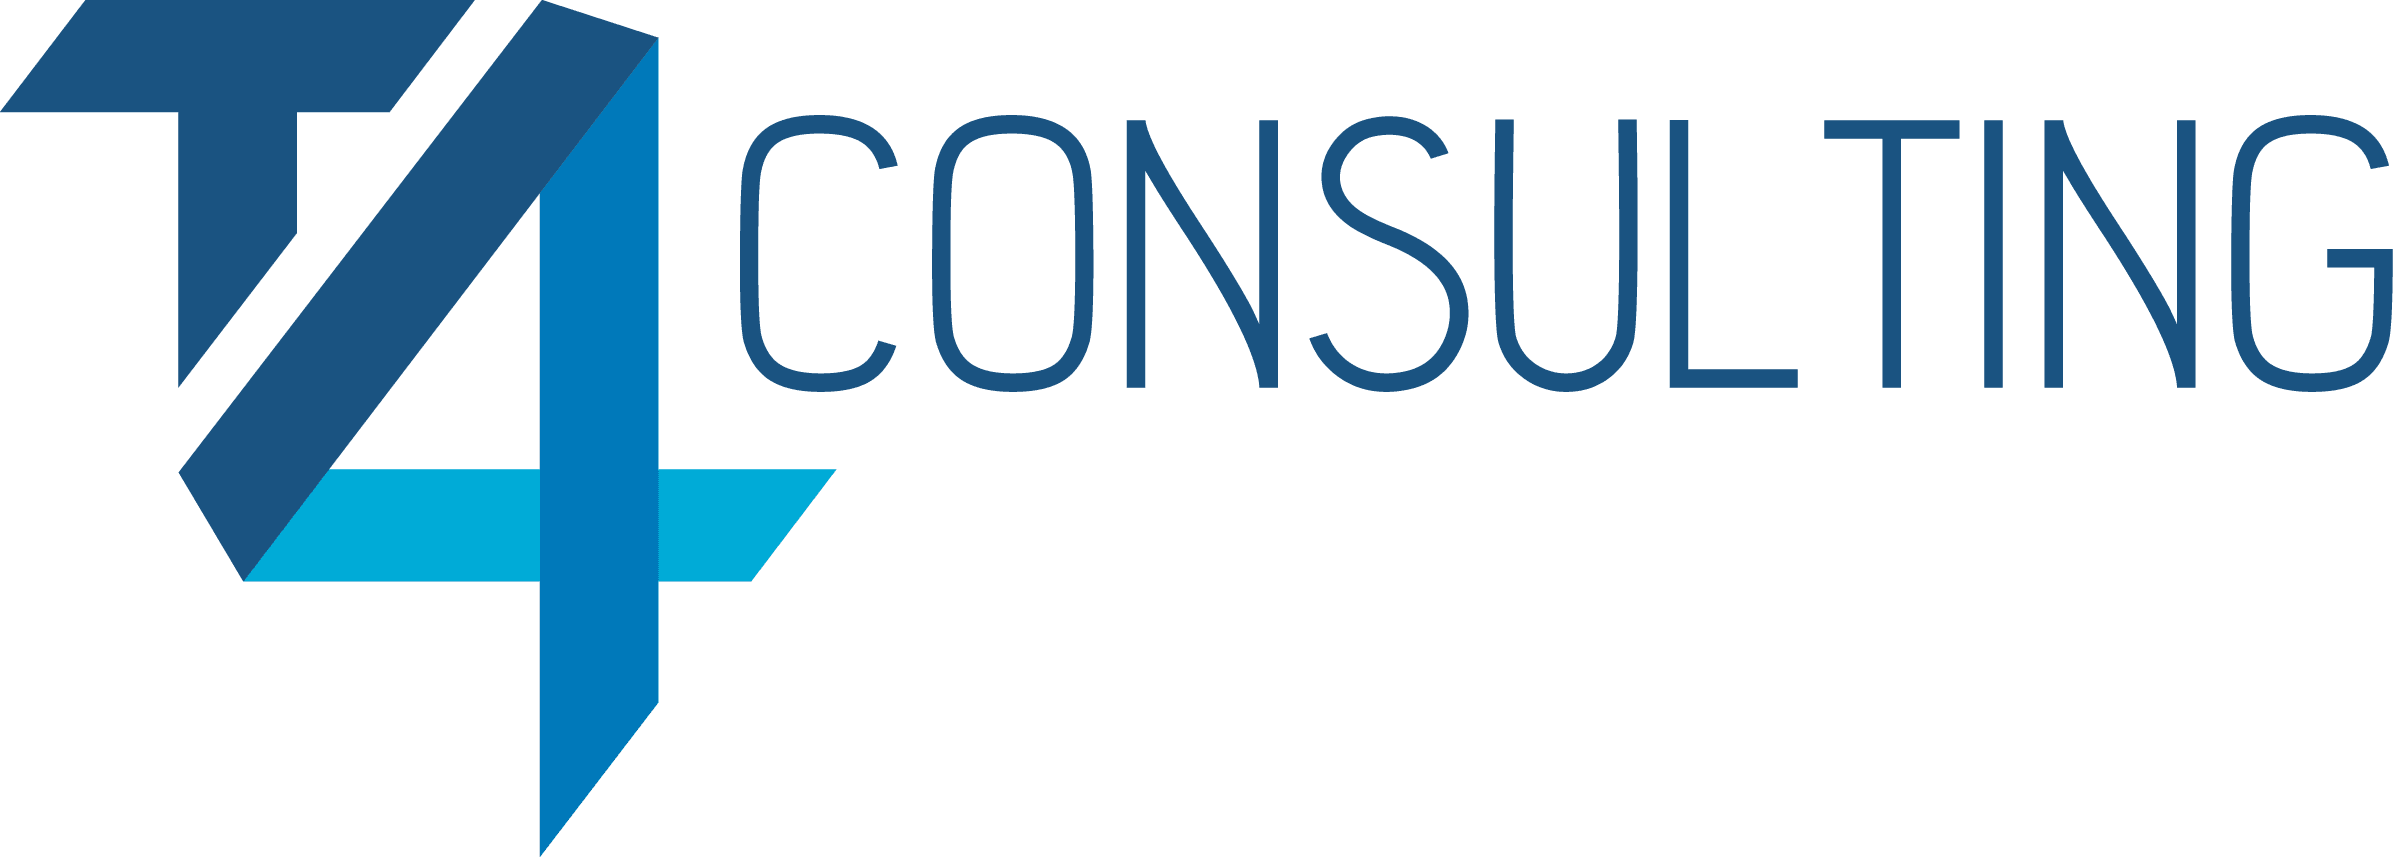 T4 Consulting